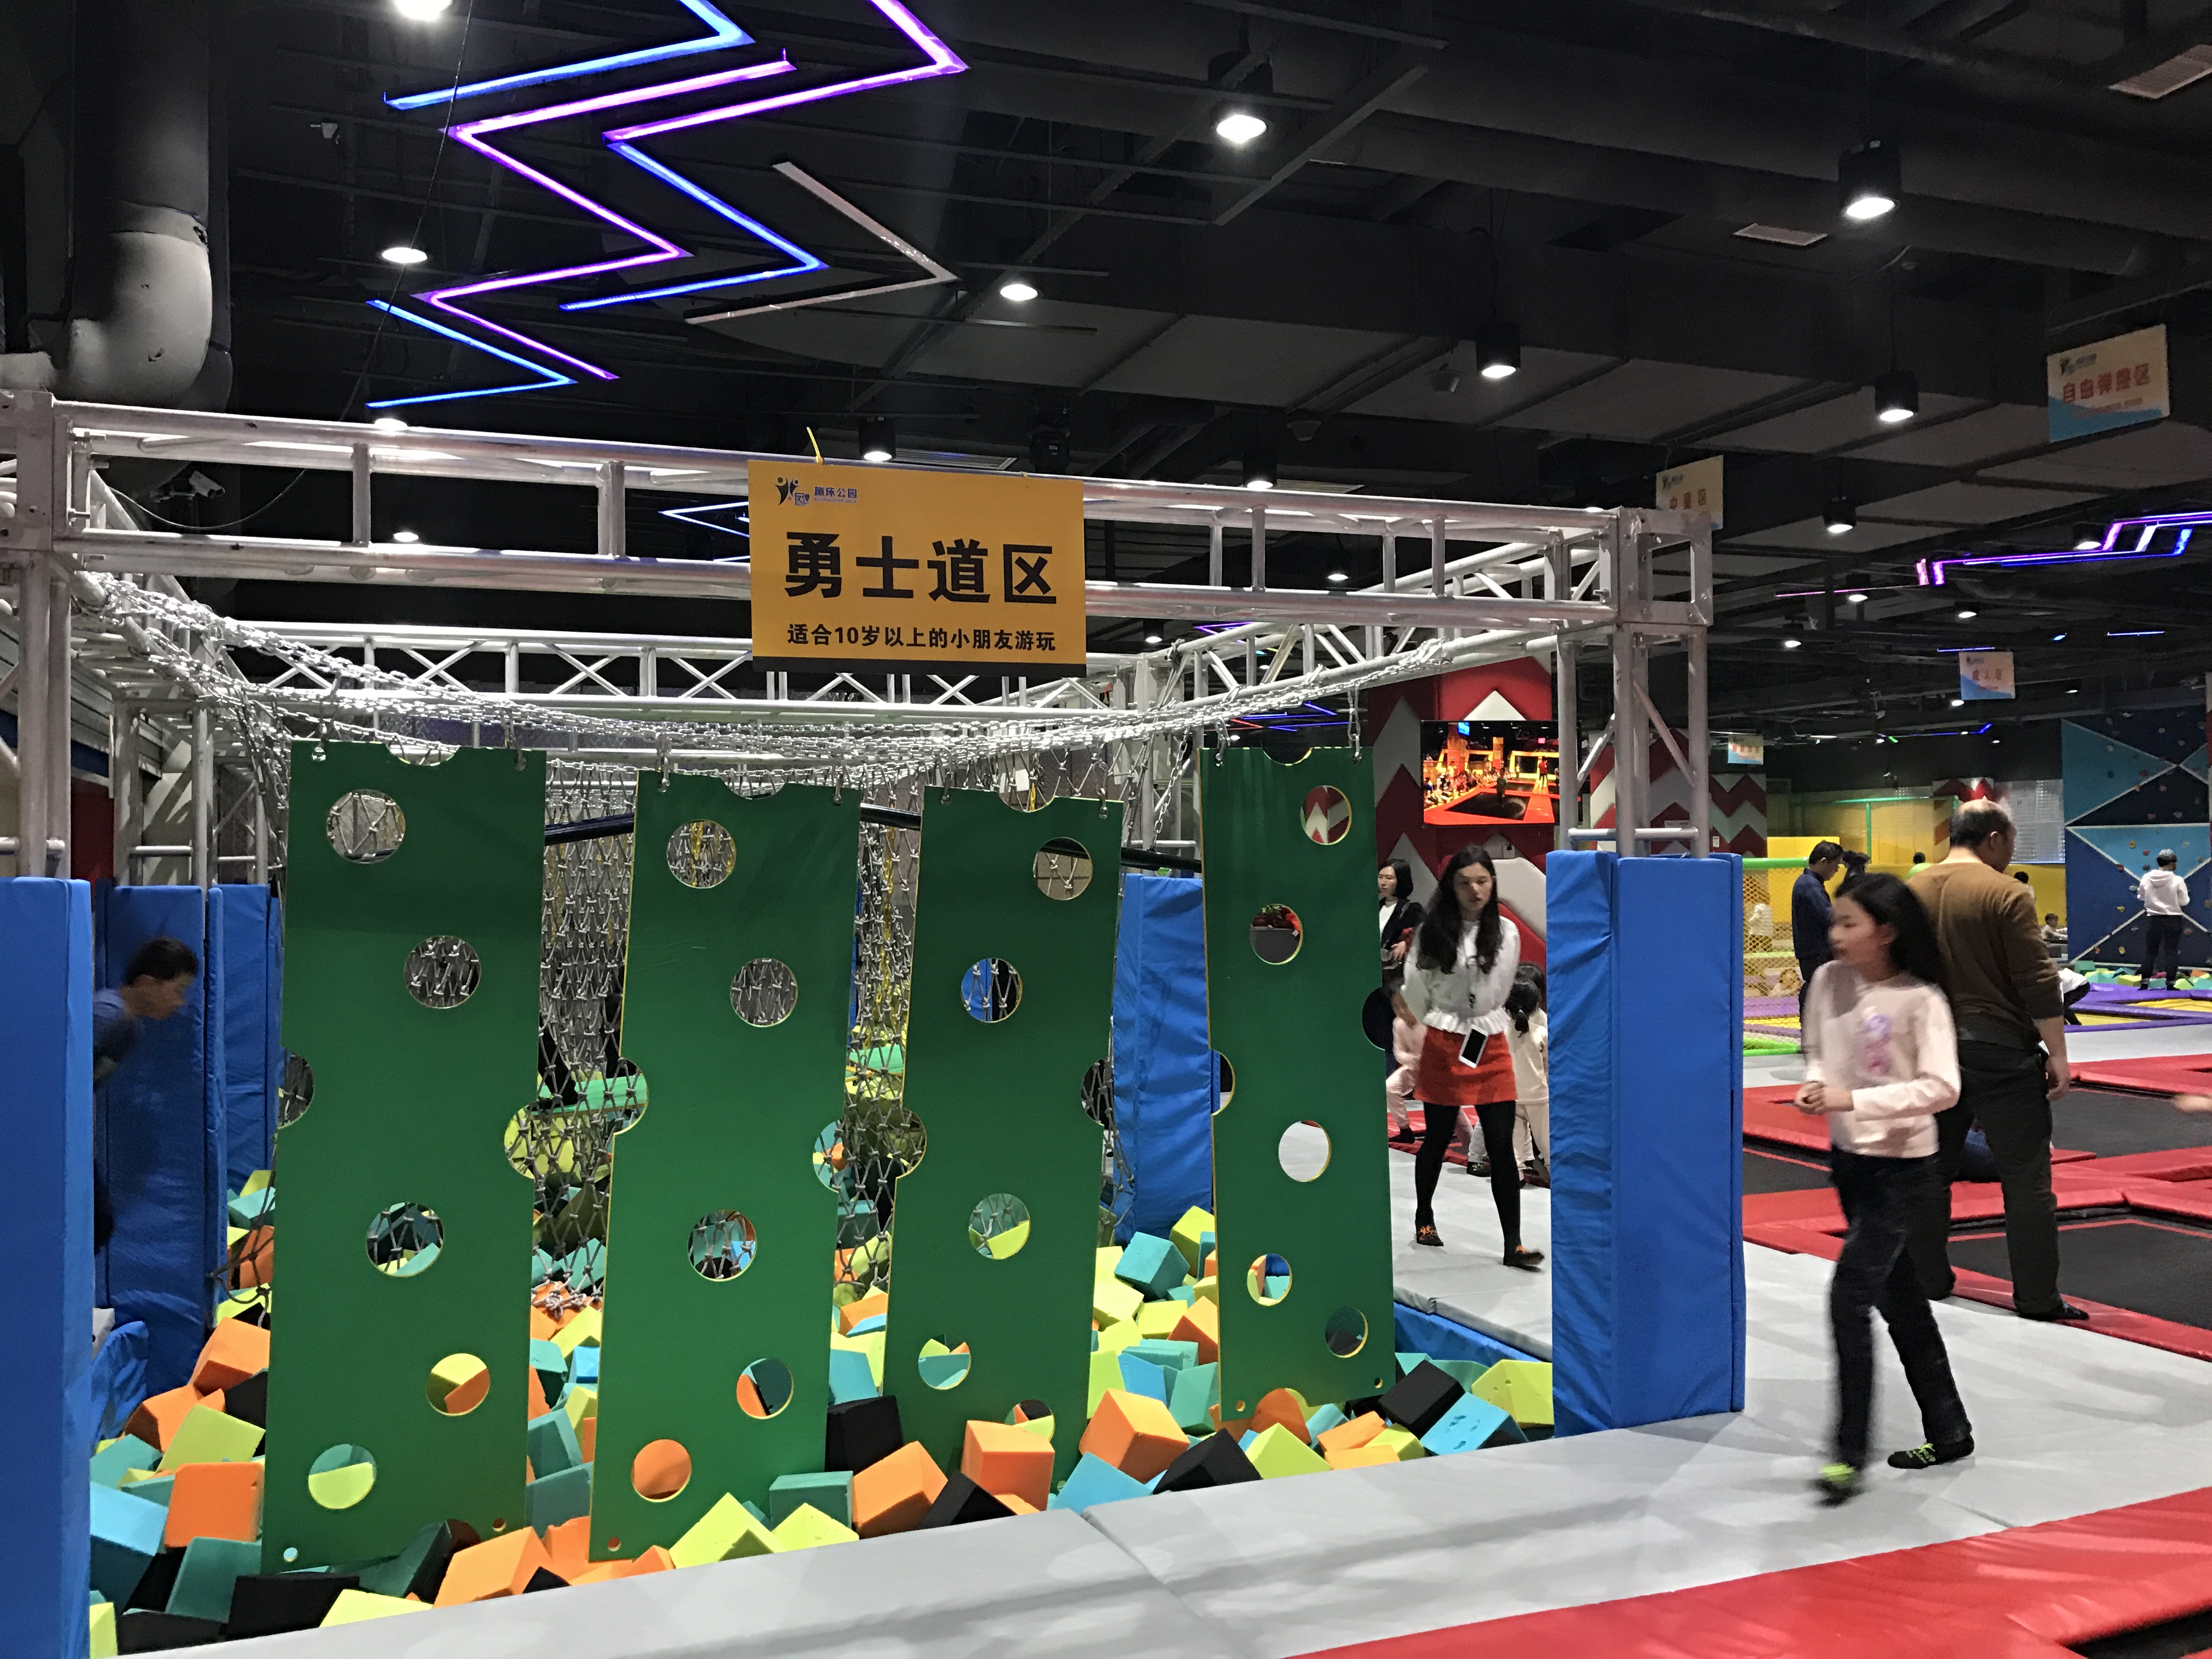 Precautions for playing climbing wall